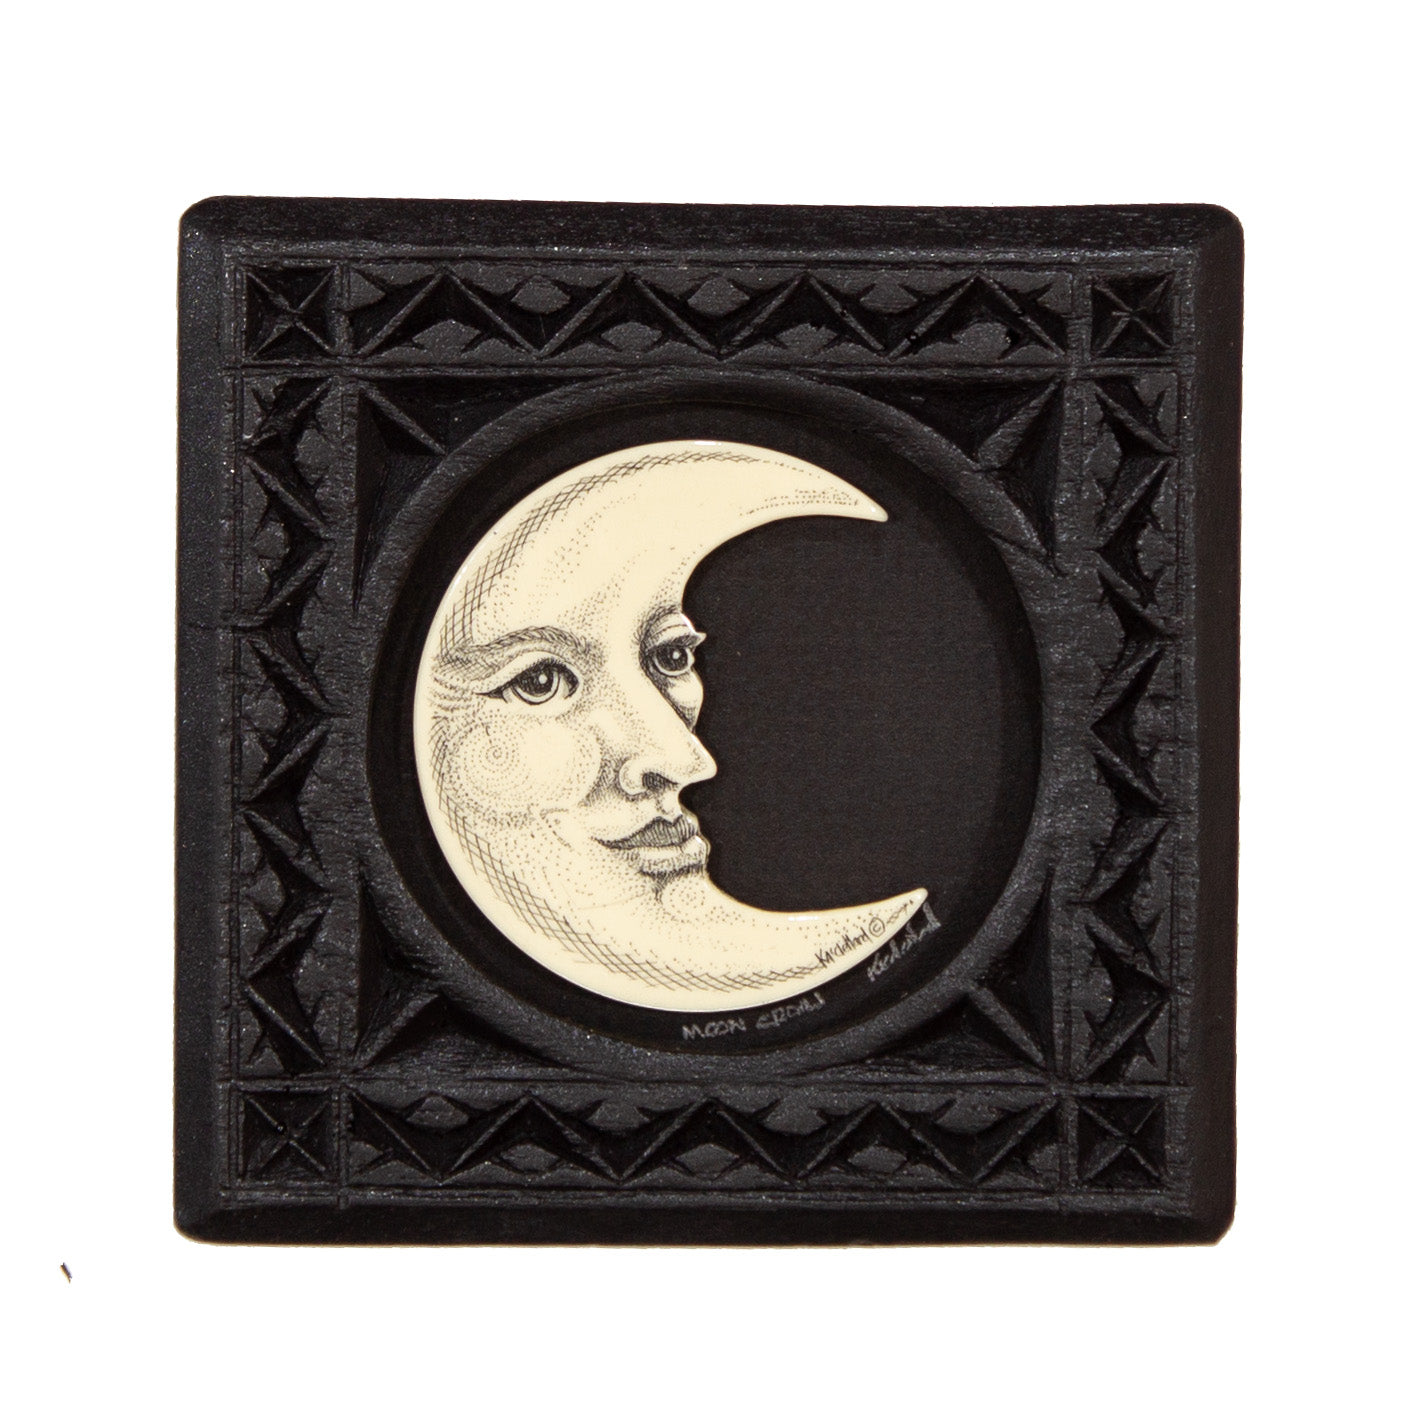 "Moon Croon" Small Chip Carved Frame